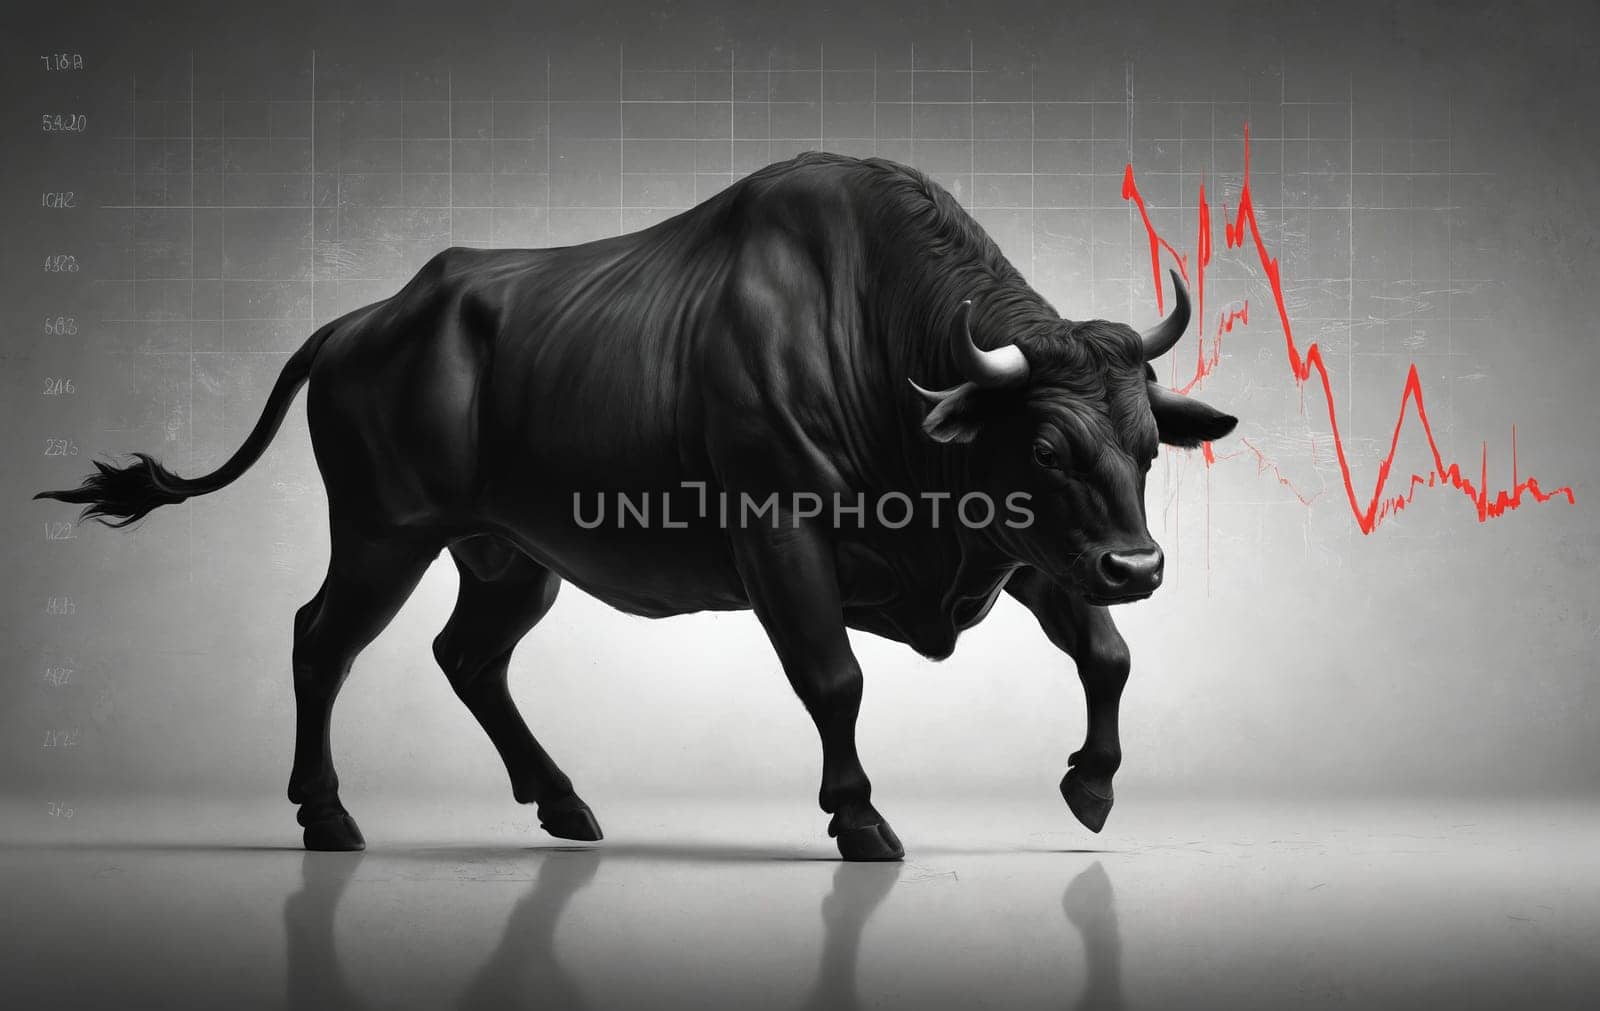 Bull carries graph on its back, walking with head high by Andre1ns